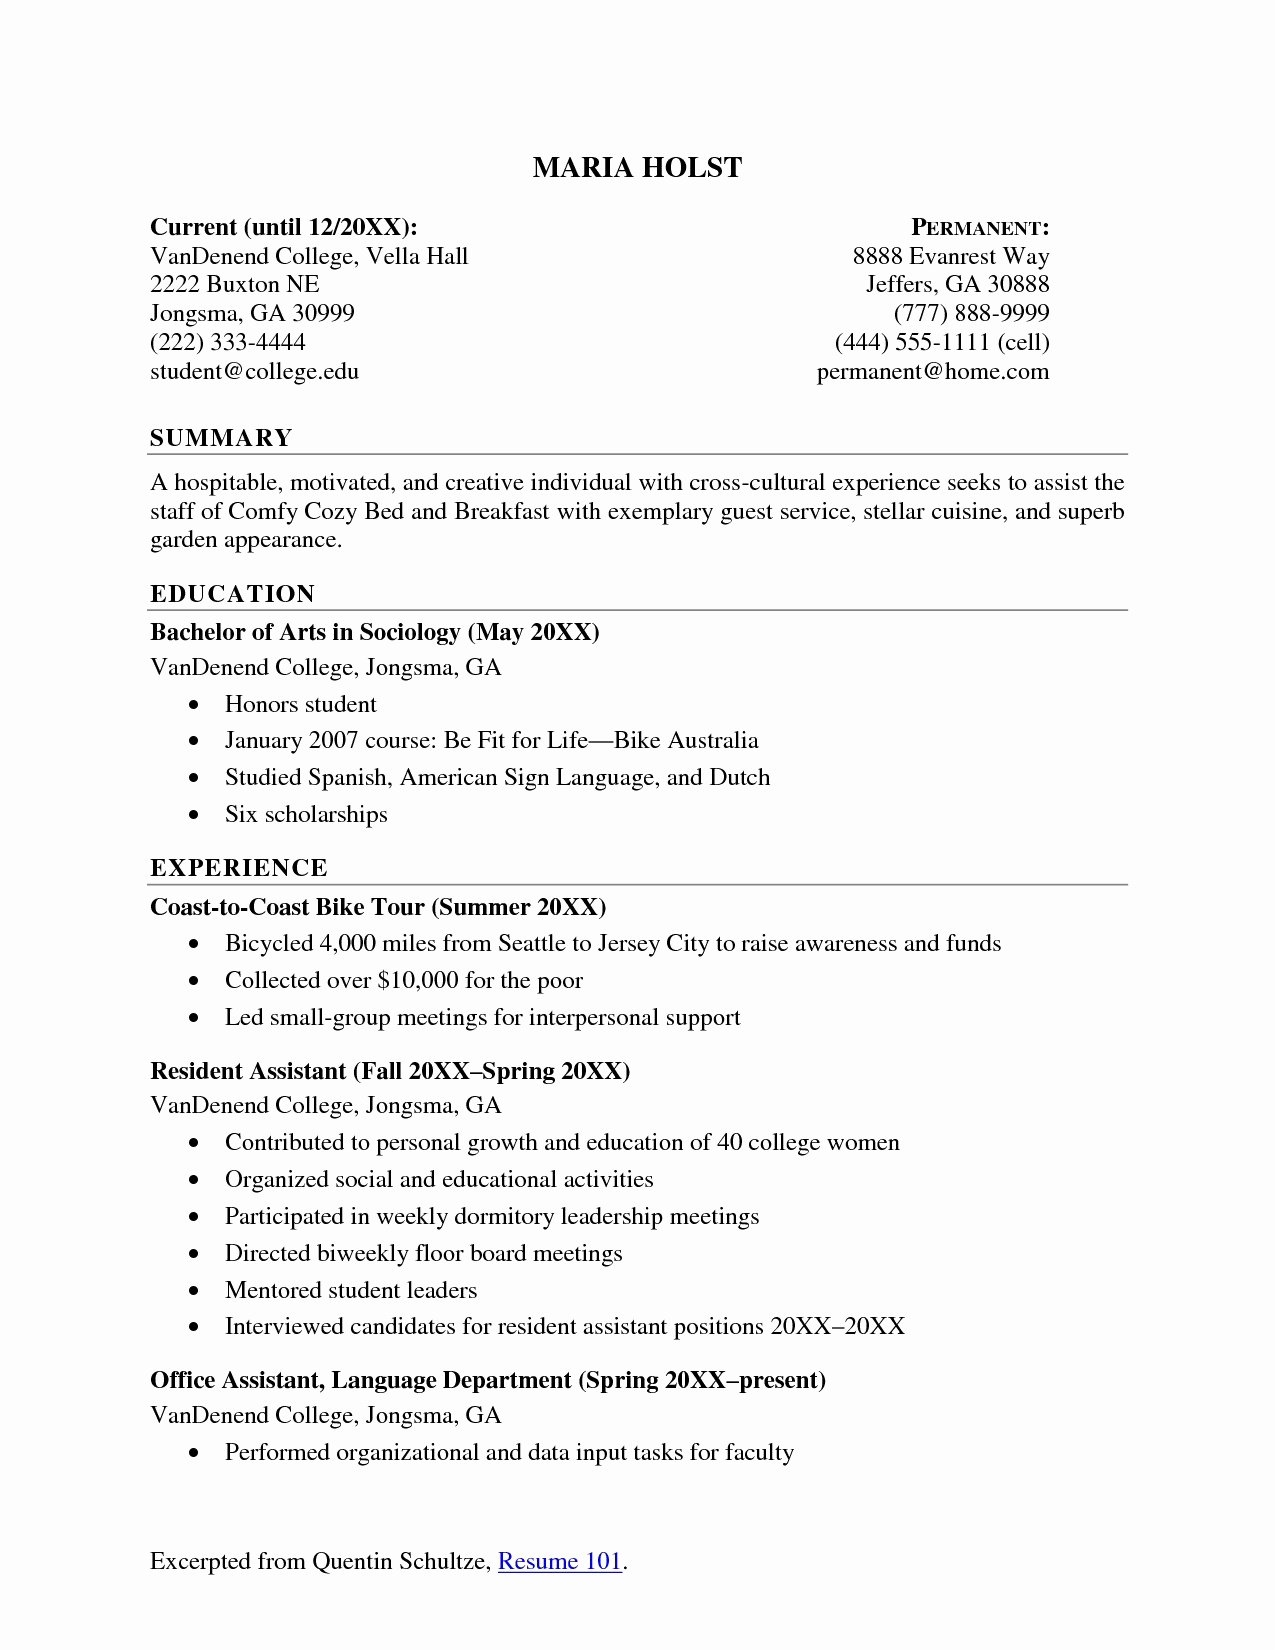 Resume Summary Examples for College Students